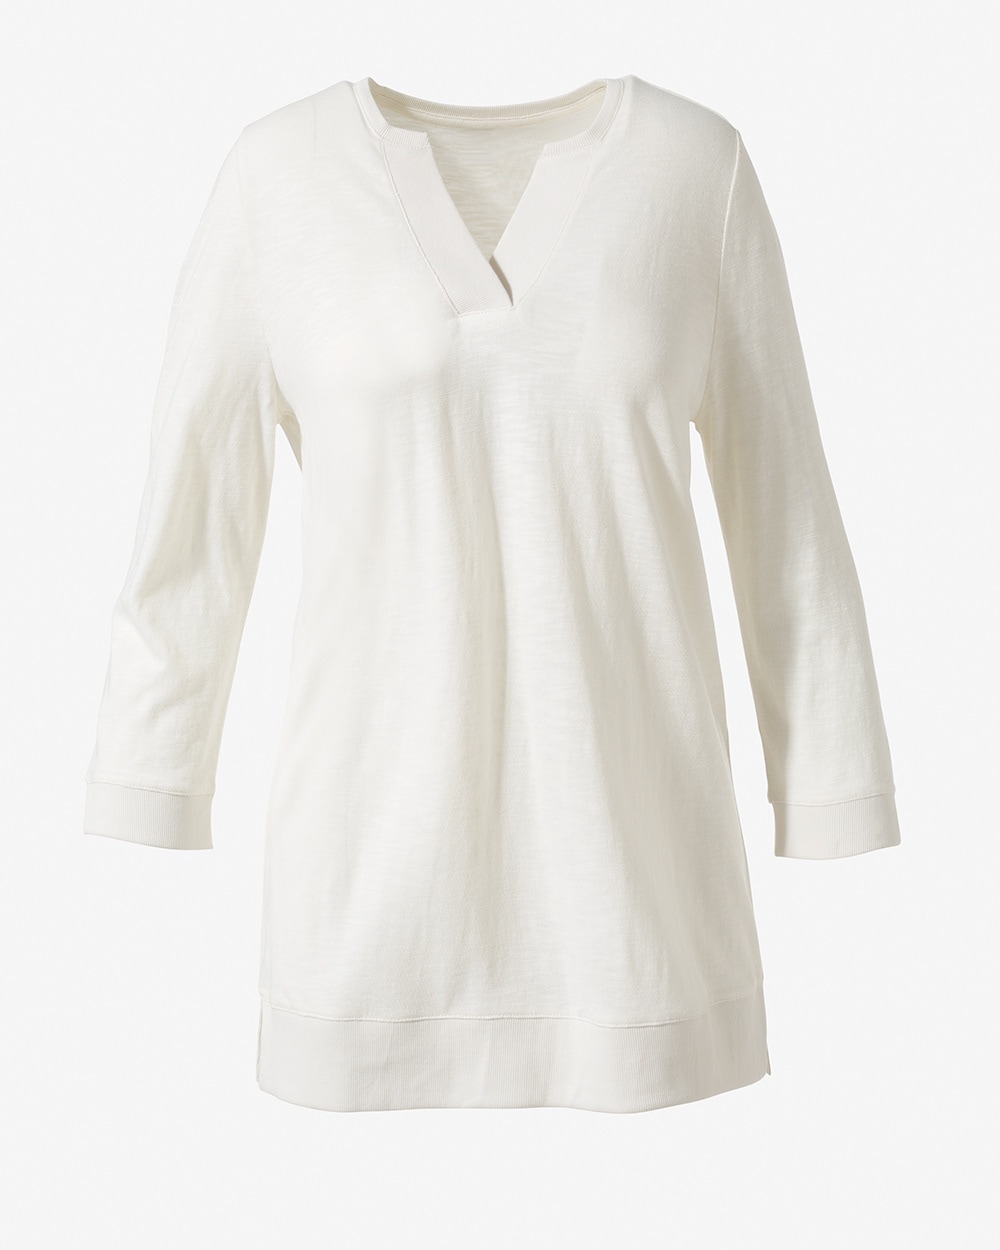 Weekends Notch 3/4-Sleeve Pullover Tunic